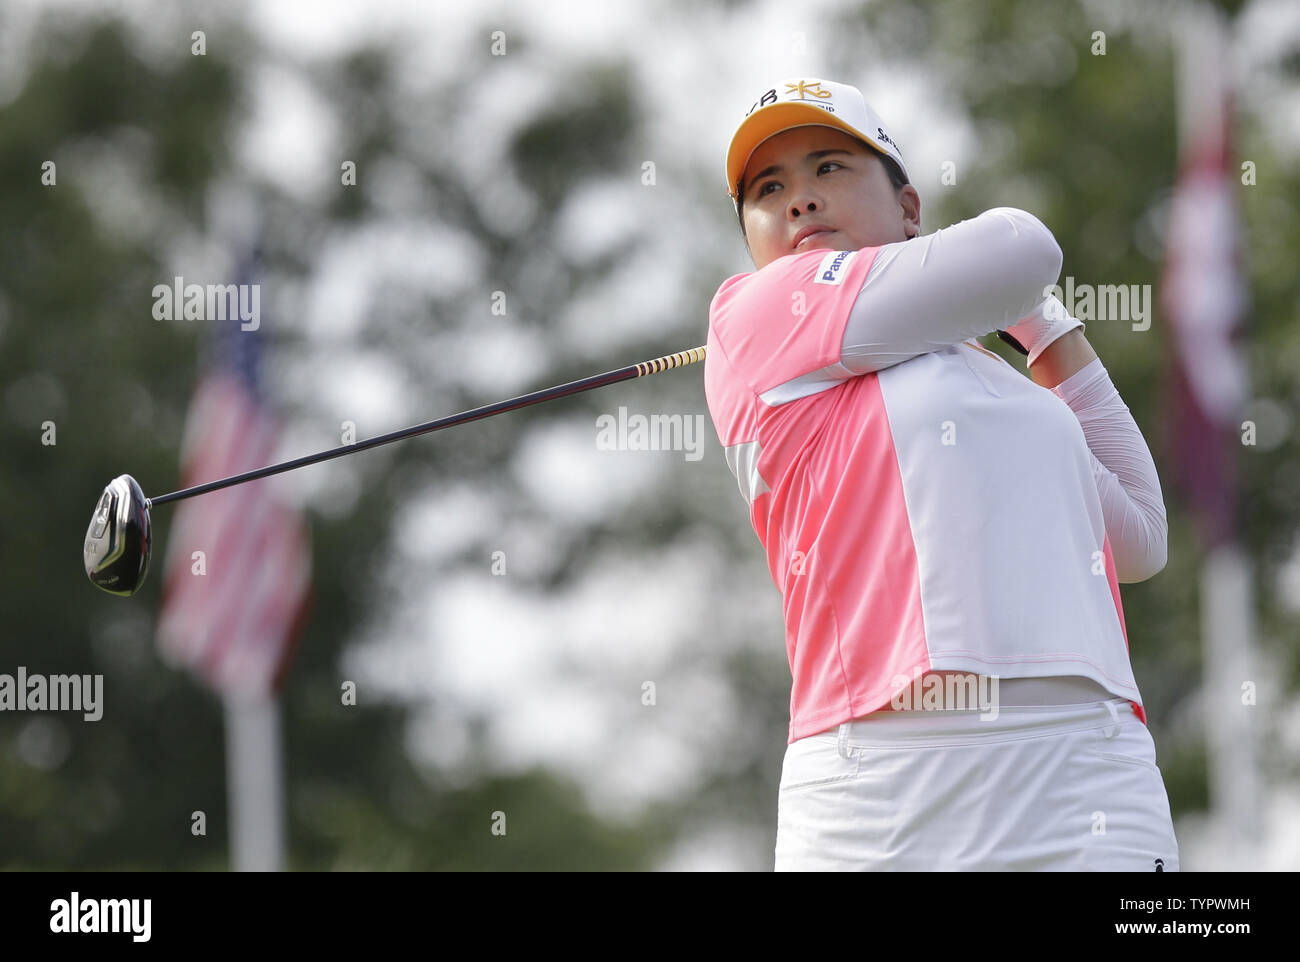 Inbee Park of Korea hits her tee shot on the 18th hole in the final round of the LPGA U.S. Women's Open Championship at Lancaster Country Club in Lancaster, PA on July 12, 2015. In Gee Chun of Korea wins the U.S. Women's Open and her first LPGA major championship with a score of 8 under par.     Photo by John Angelillo/UPI Stock Photo